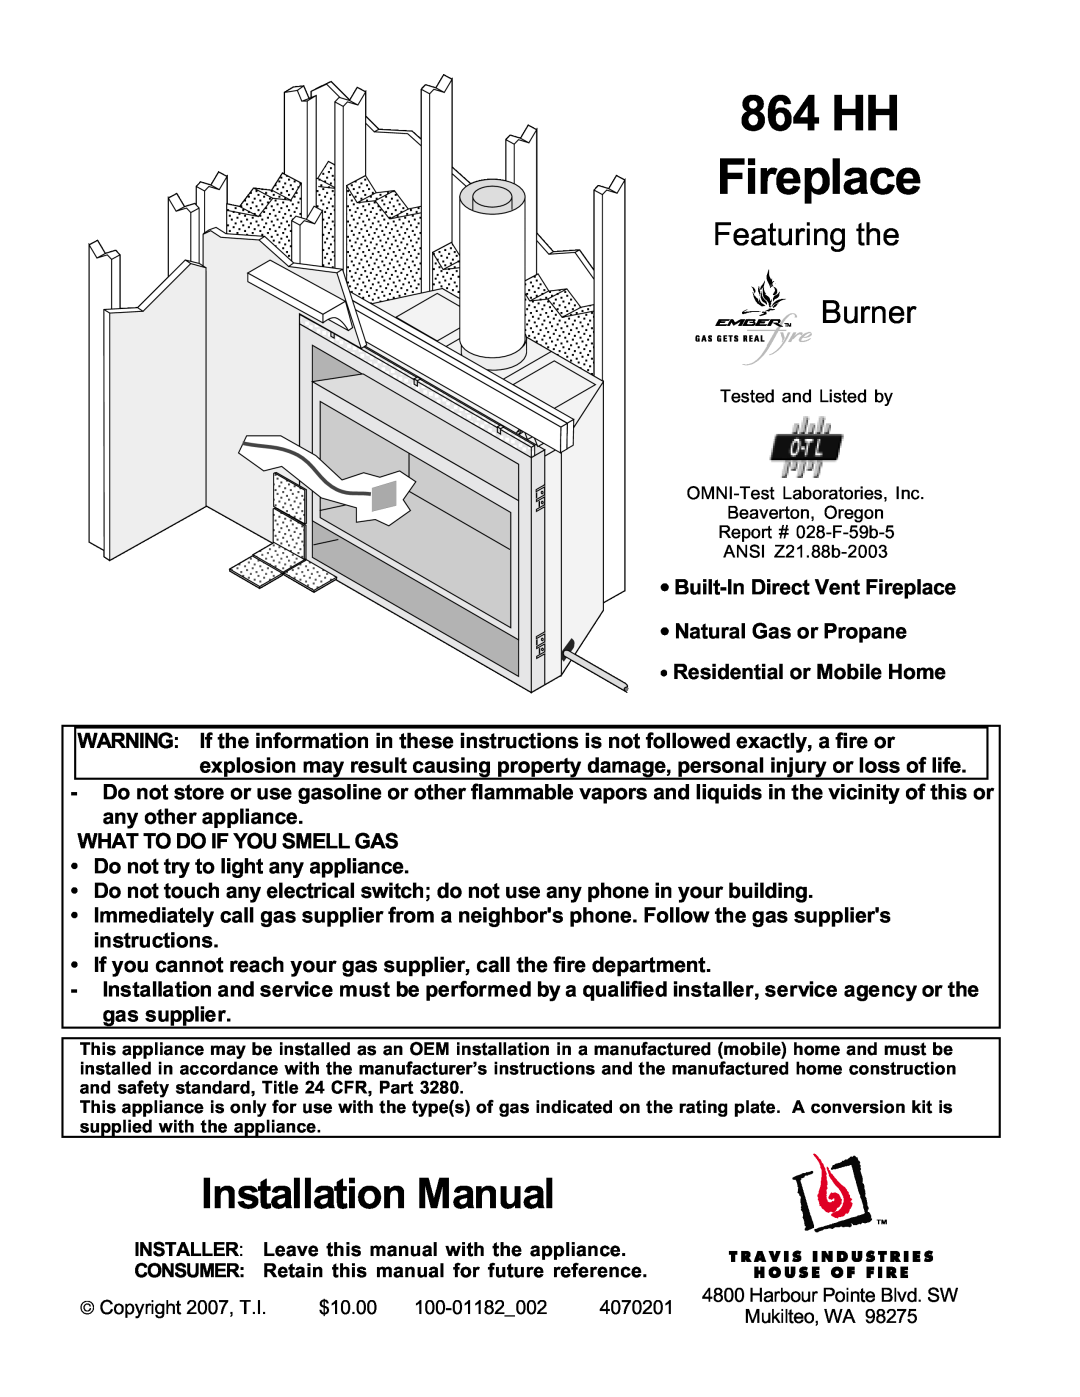 North Star 864 HH installation manual • Built-InDirect Vent Fireplace, • Natural Gas or Propane, HH Fireplace 